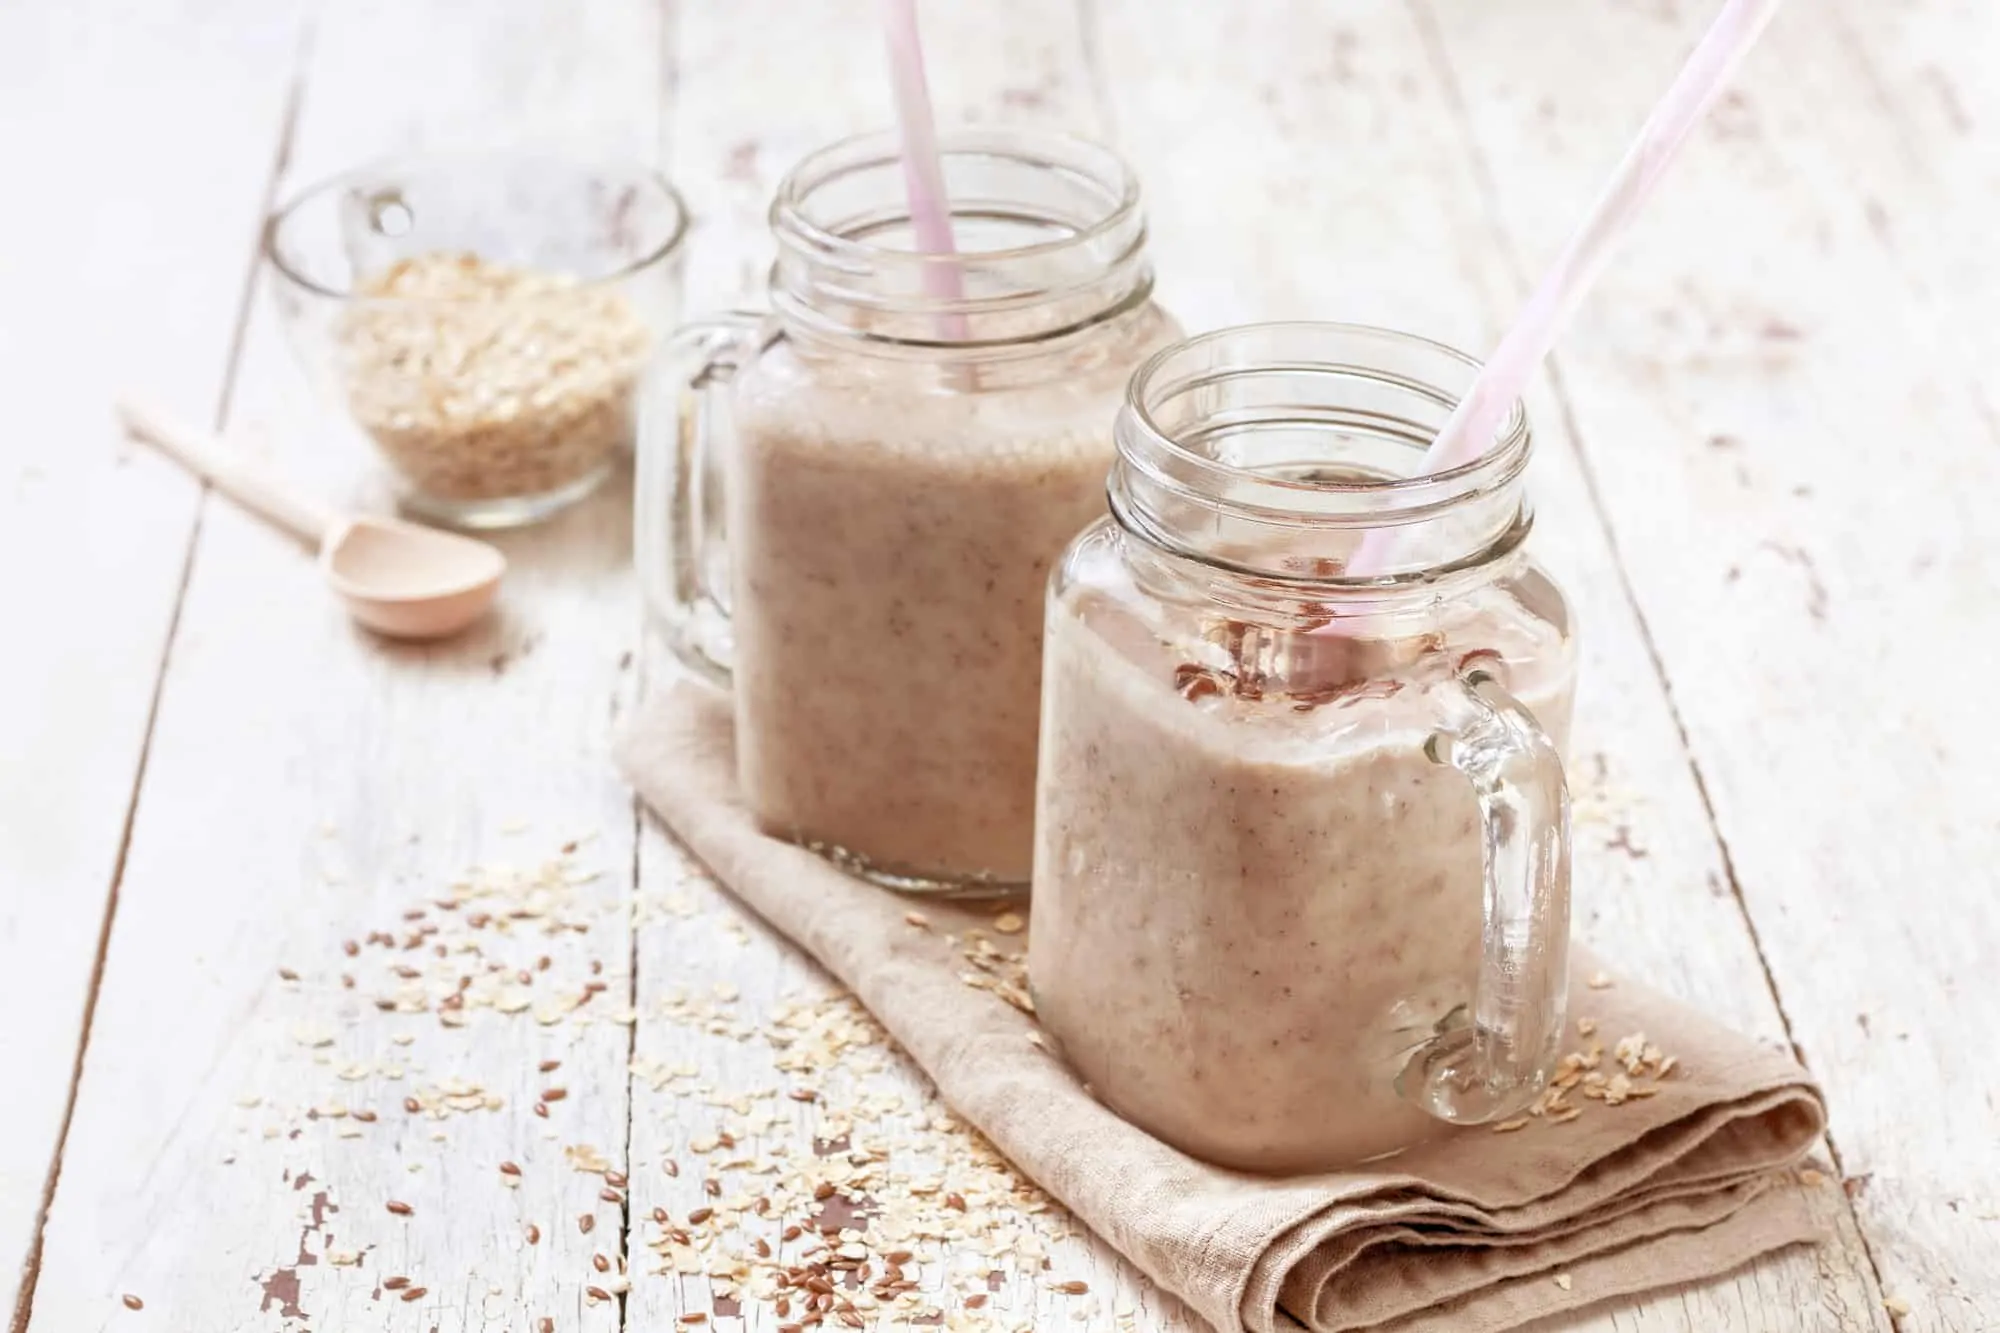 smoothies with oatmeal, flax seeds in glass jars on a wooden background